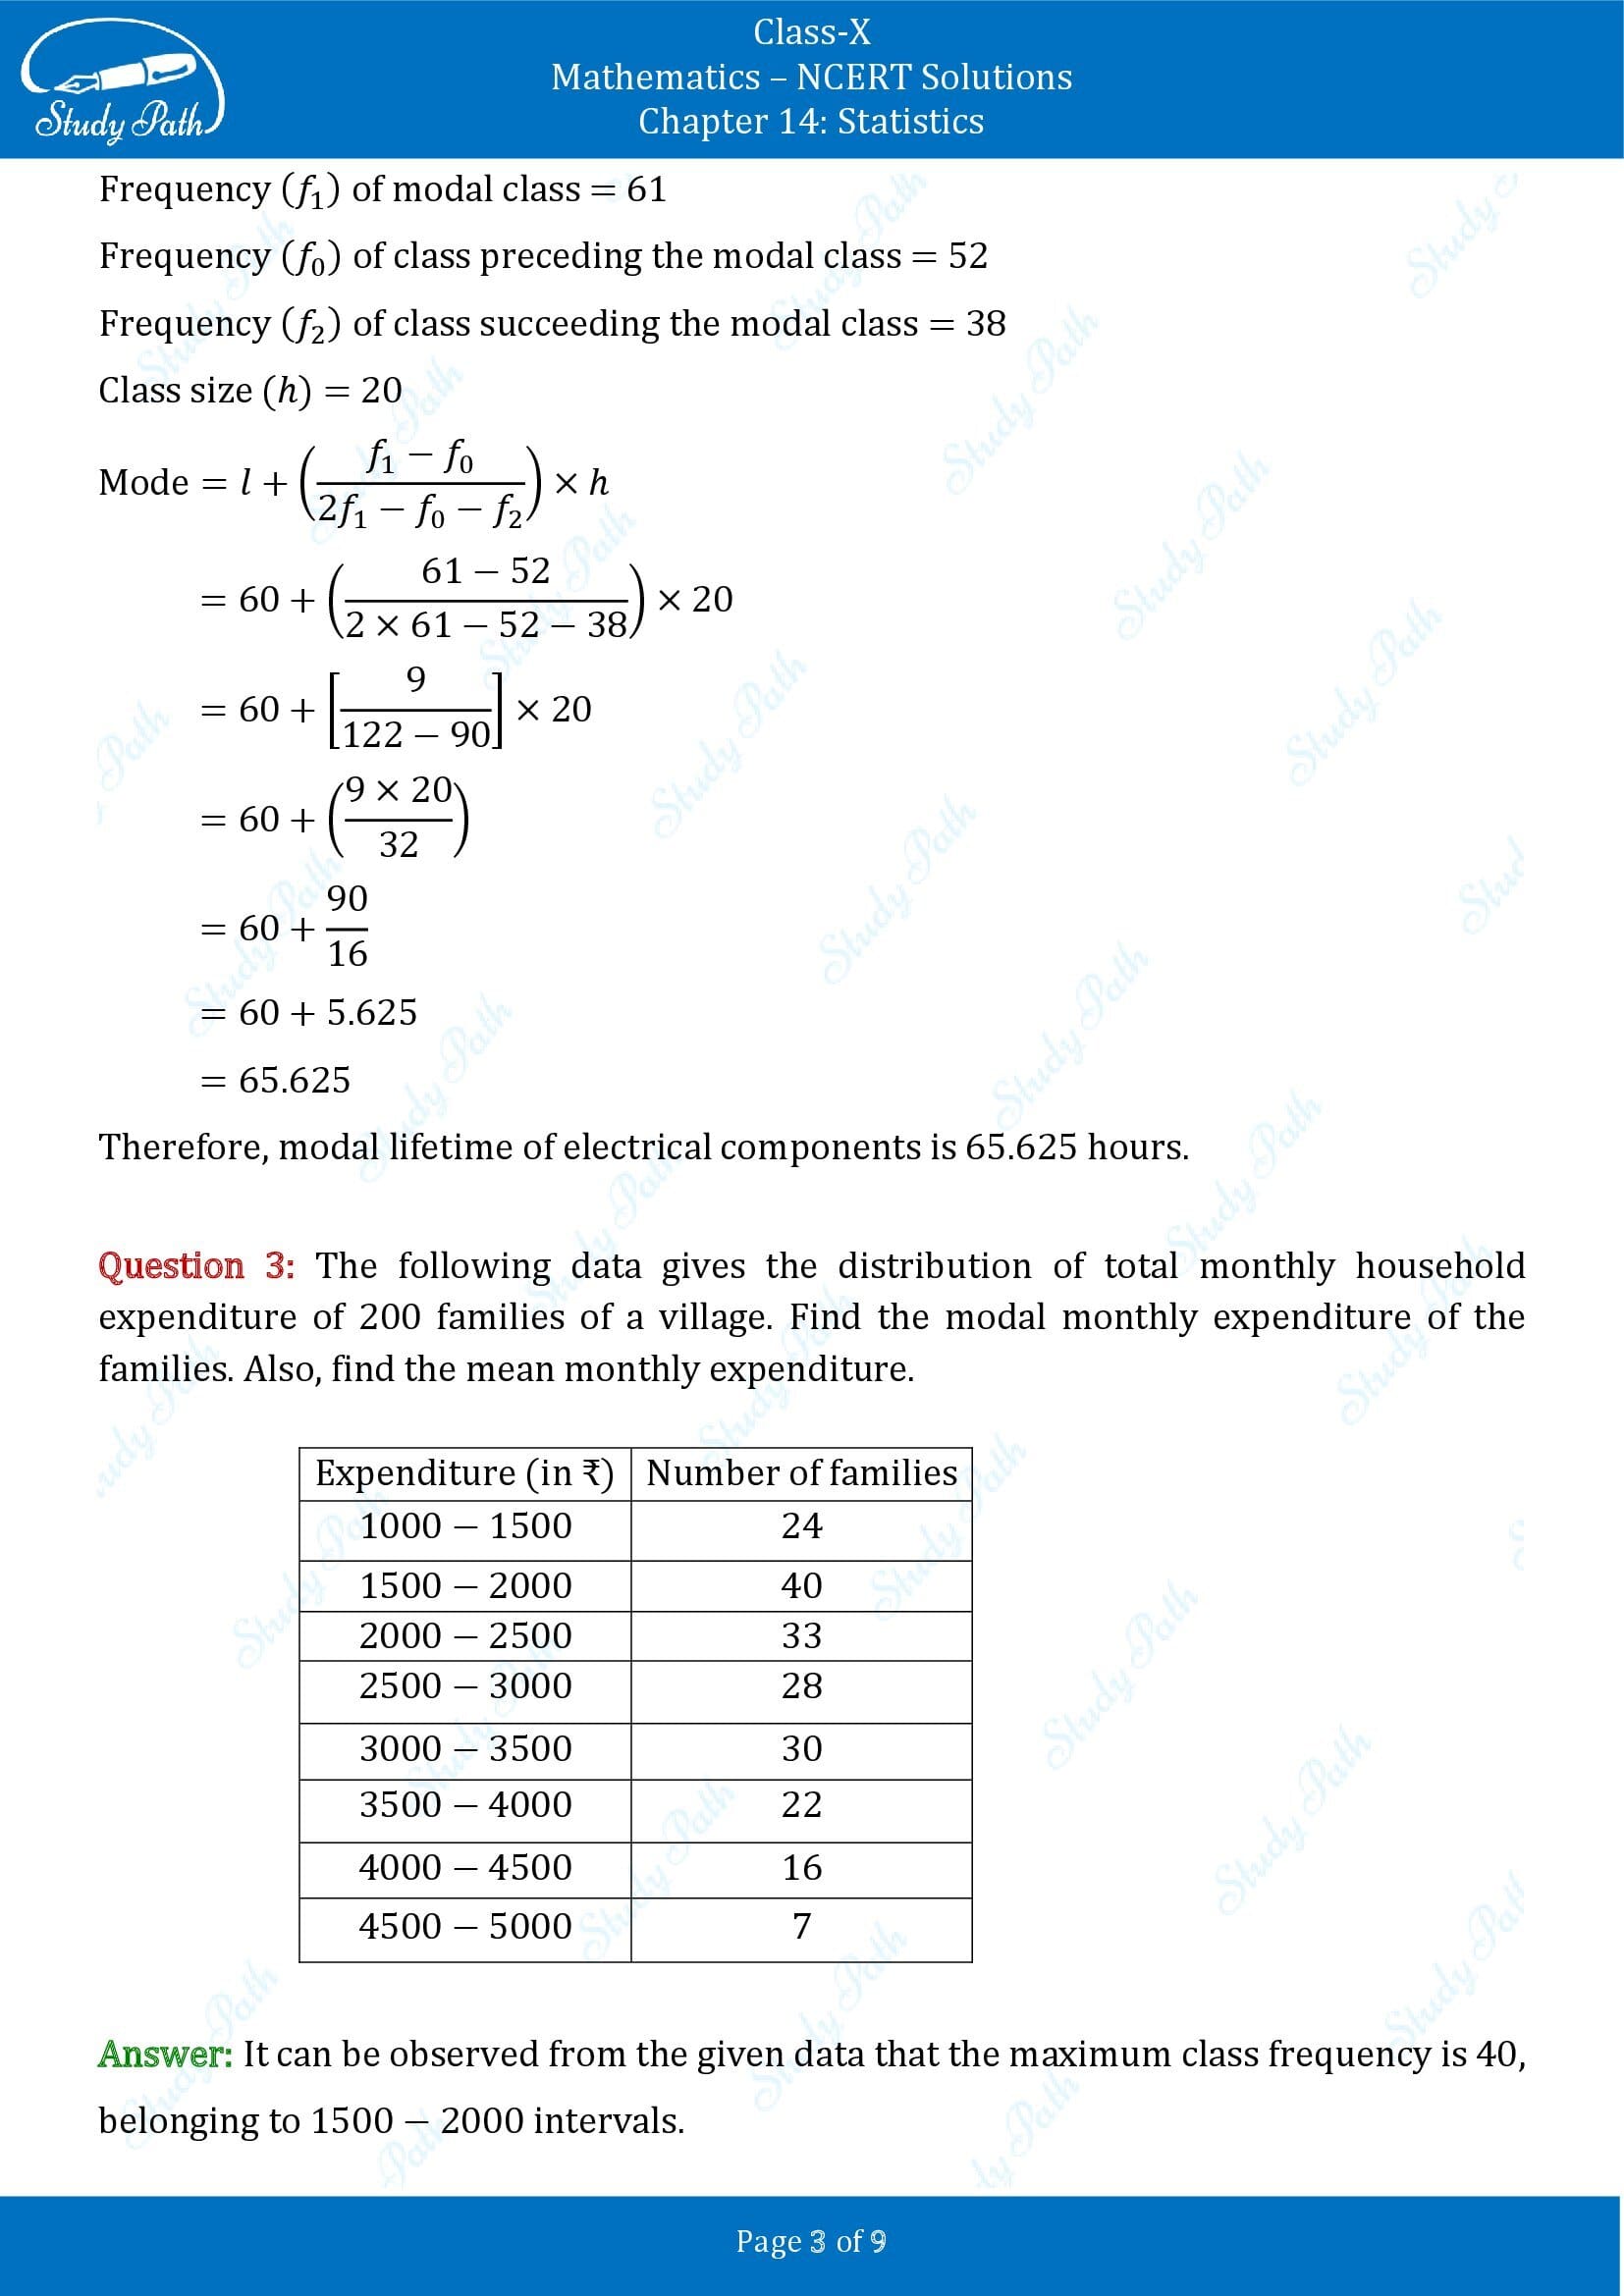 NCERT Solutions for Class 10 Maths Chapter 14 Statistics Exercise 14.2 00003